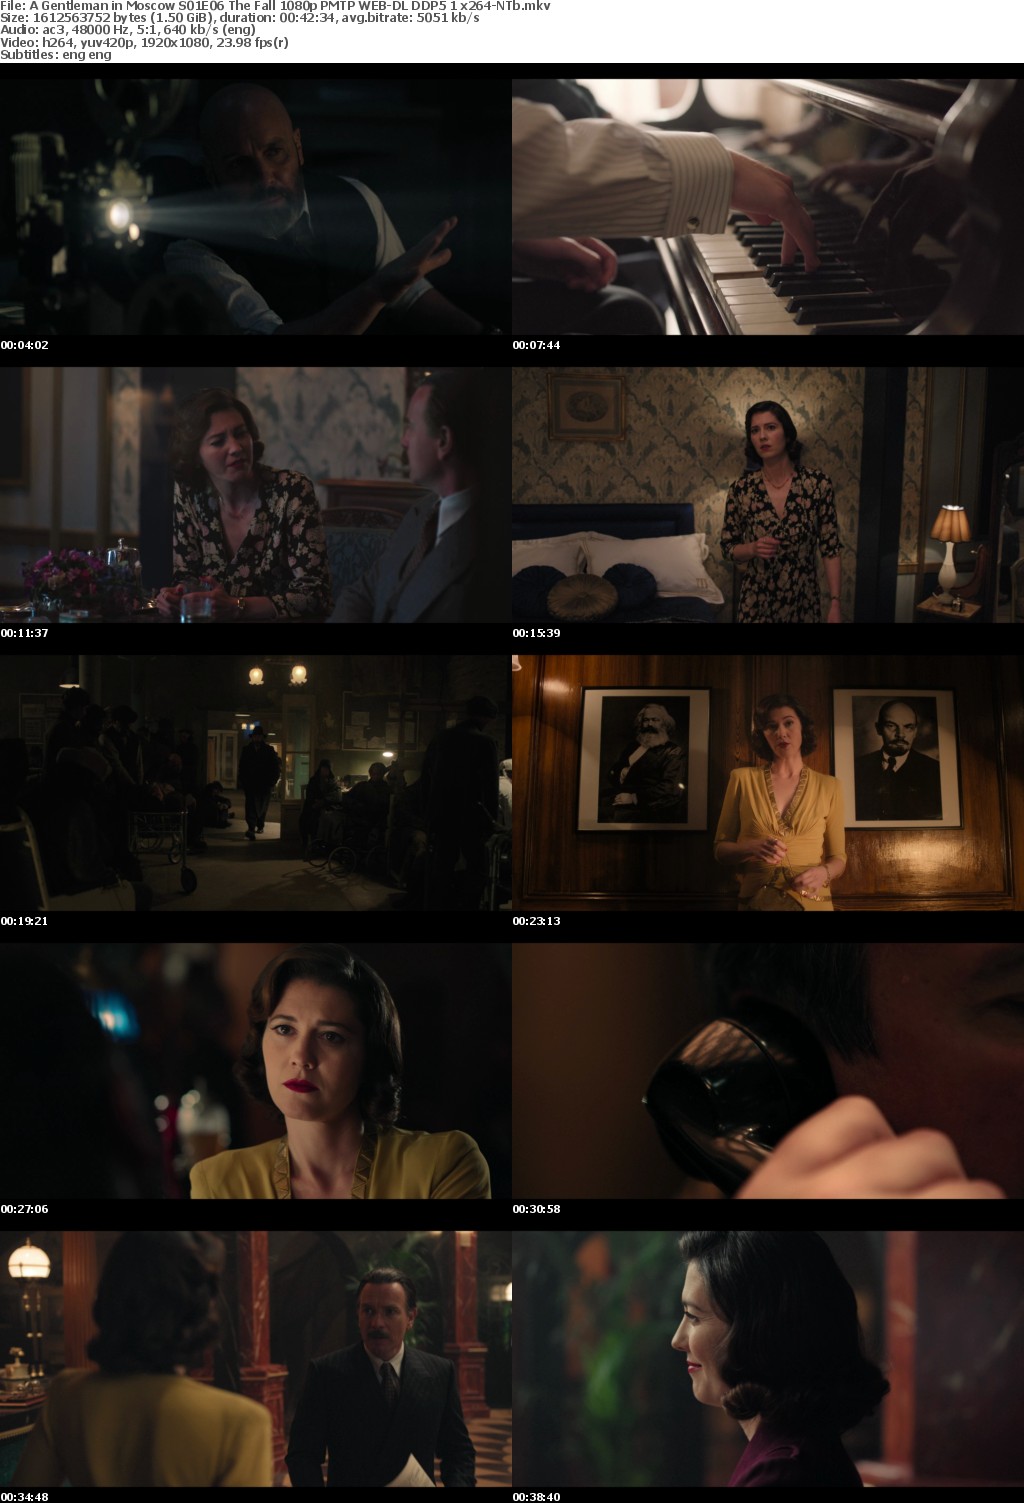 A Gentleman in Moscow S01E06 The Fall 1080p PMTP WEB-DL DDP5 1 x264-NTb